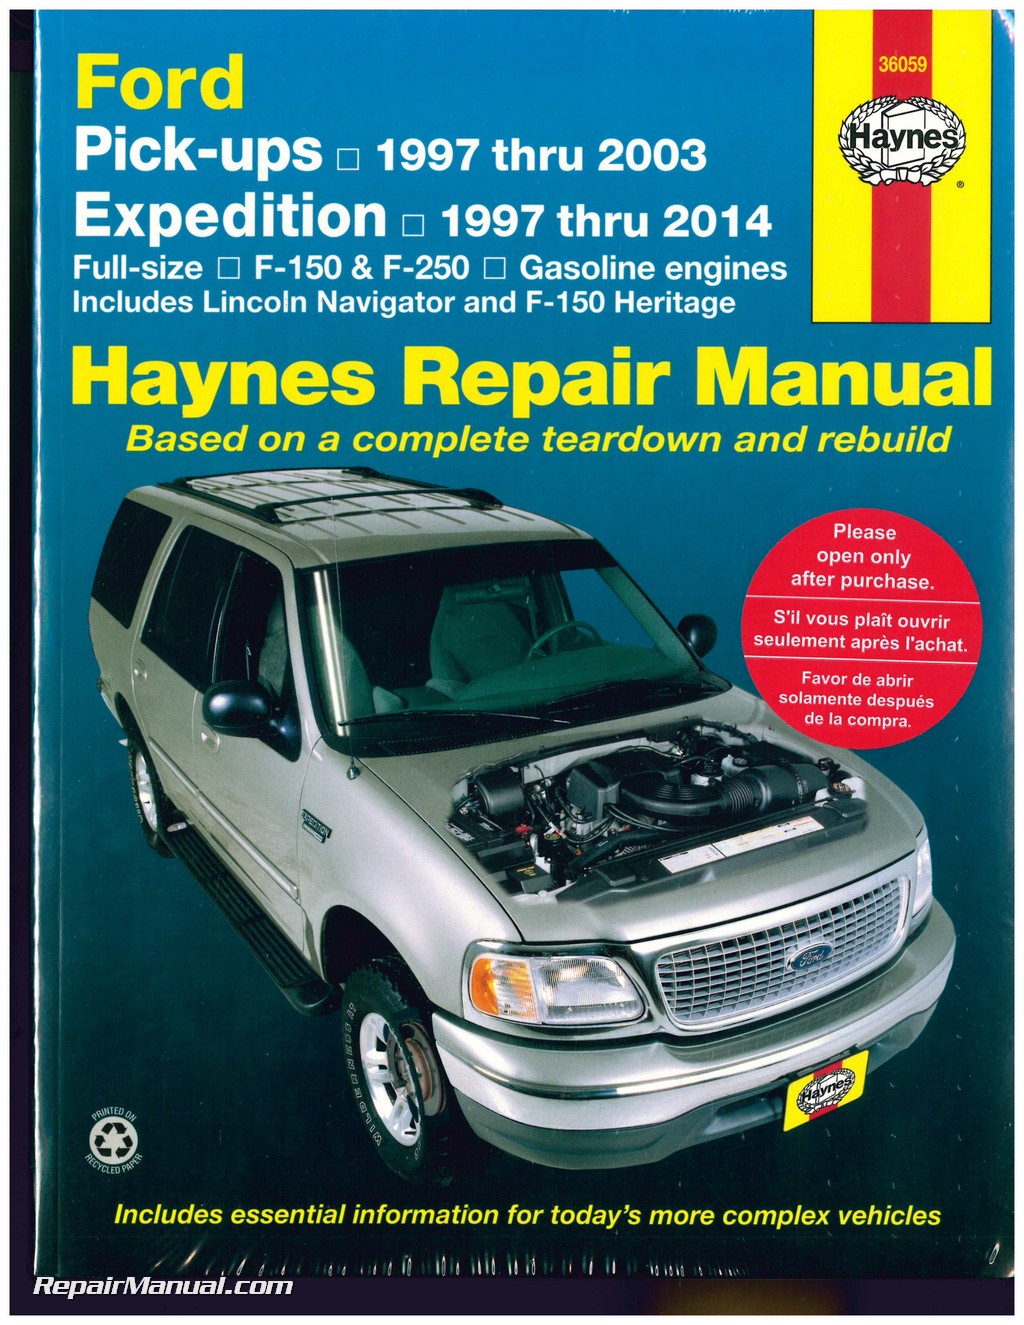 1997 Ford expedition owners manual online #7